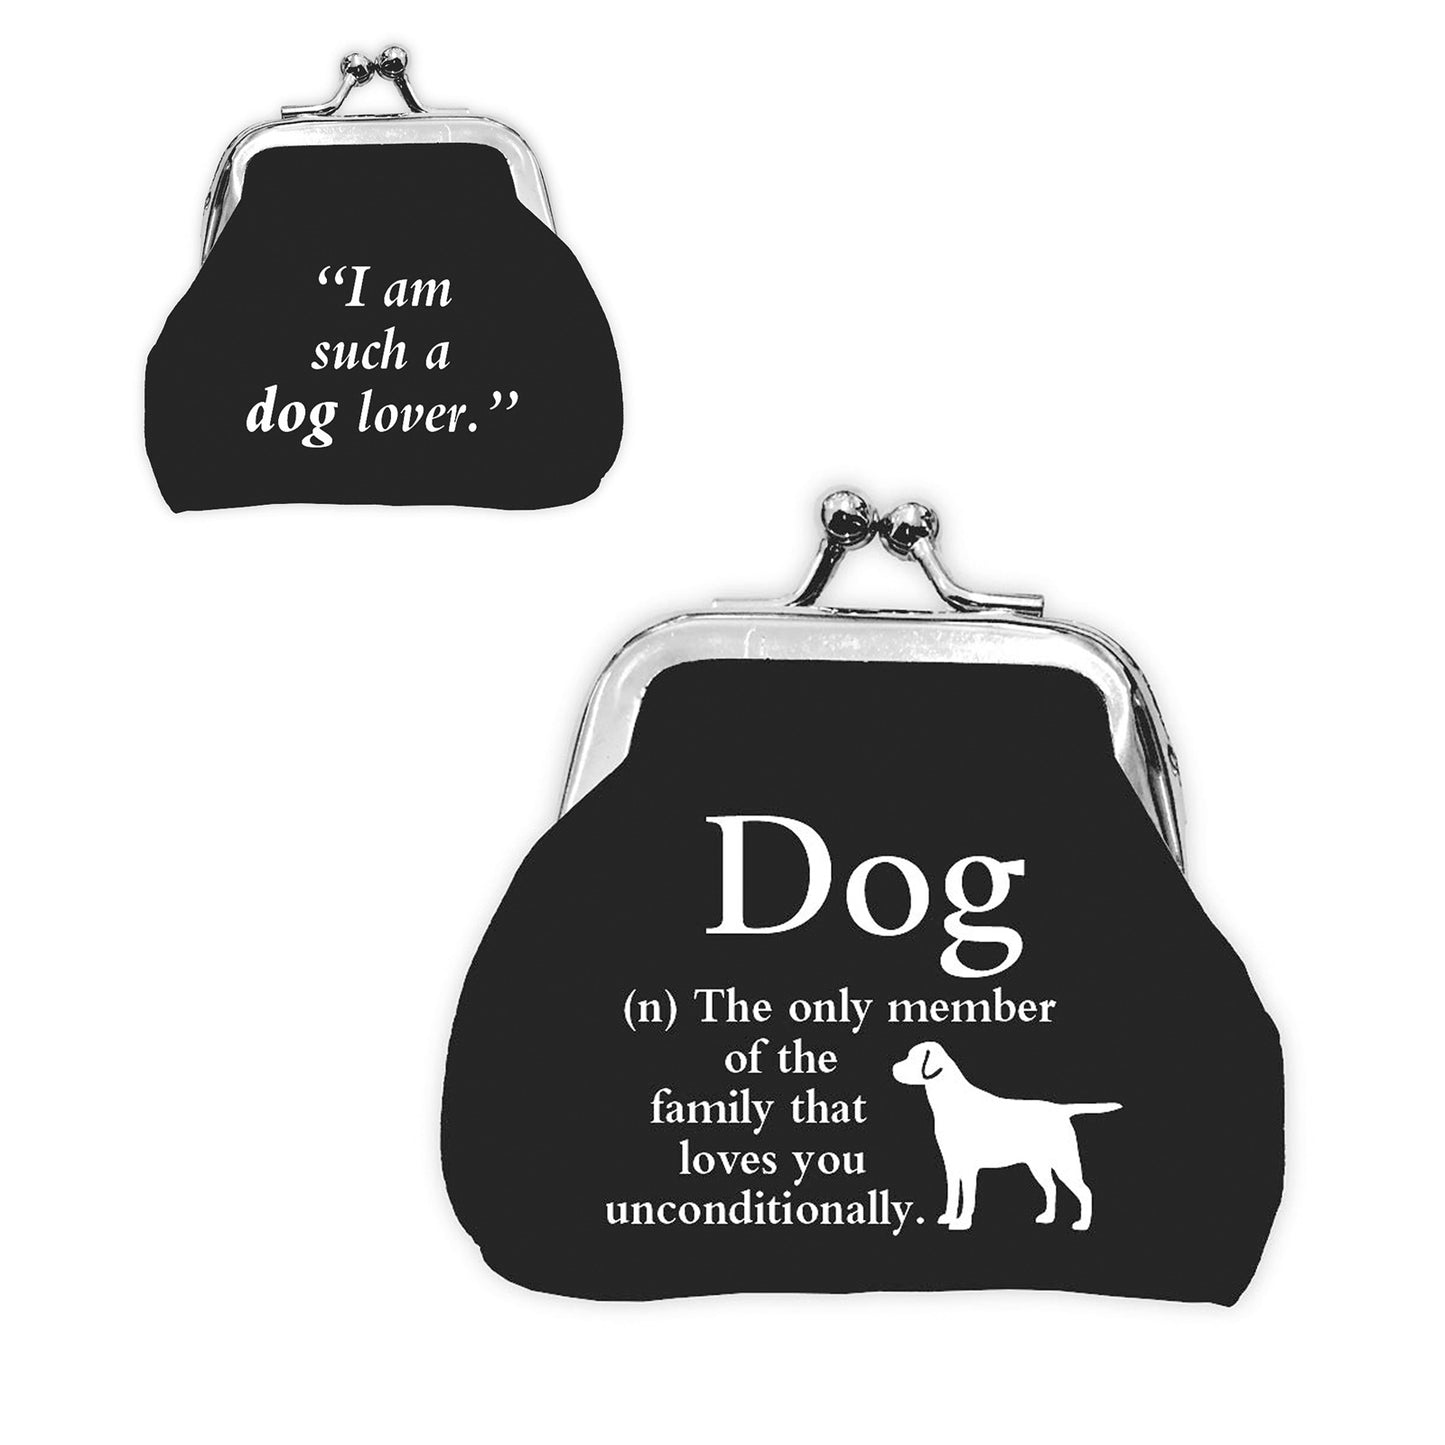 Urban Words Mini Clip Purse "Dog" with urban Meaning